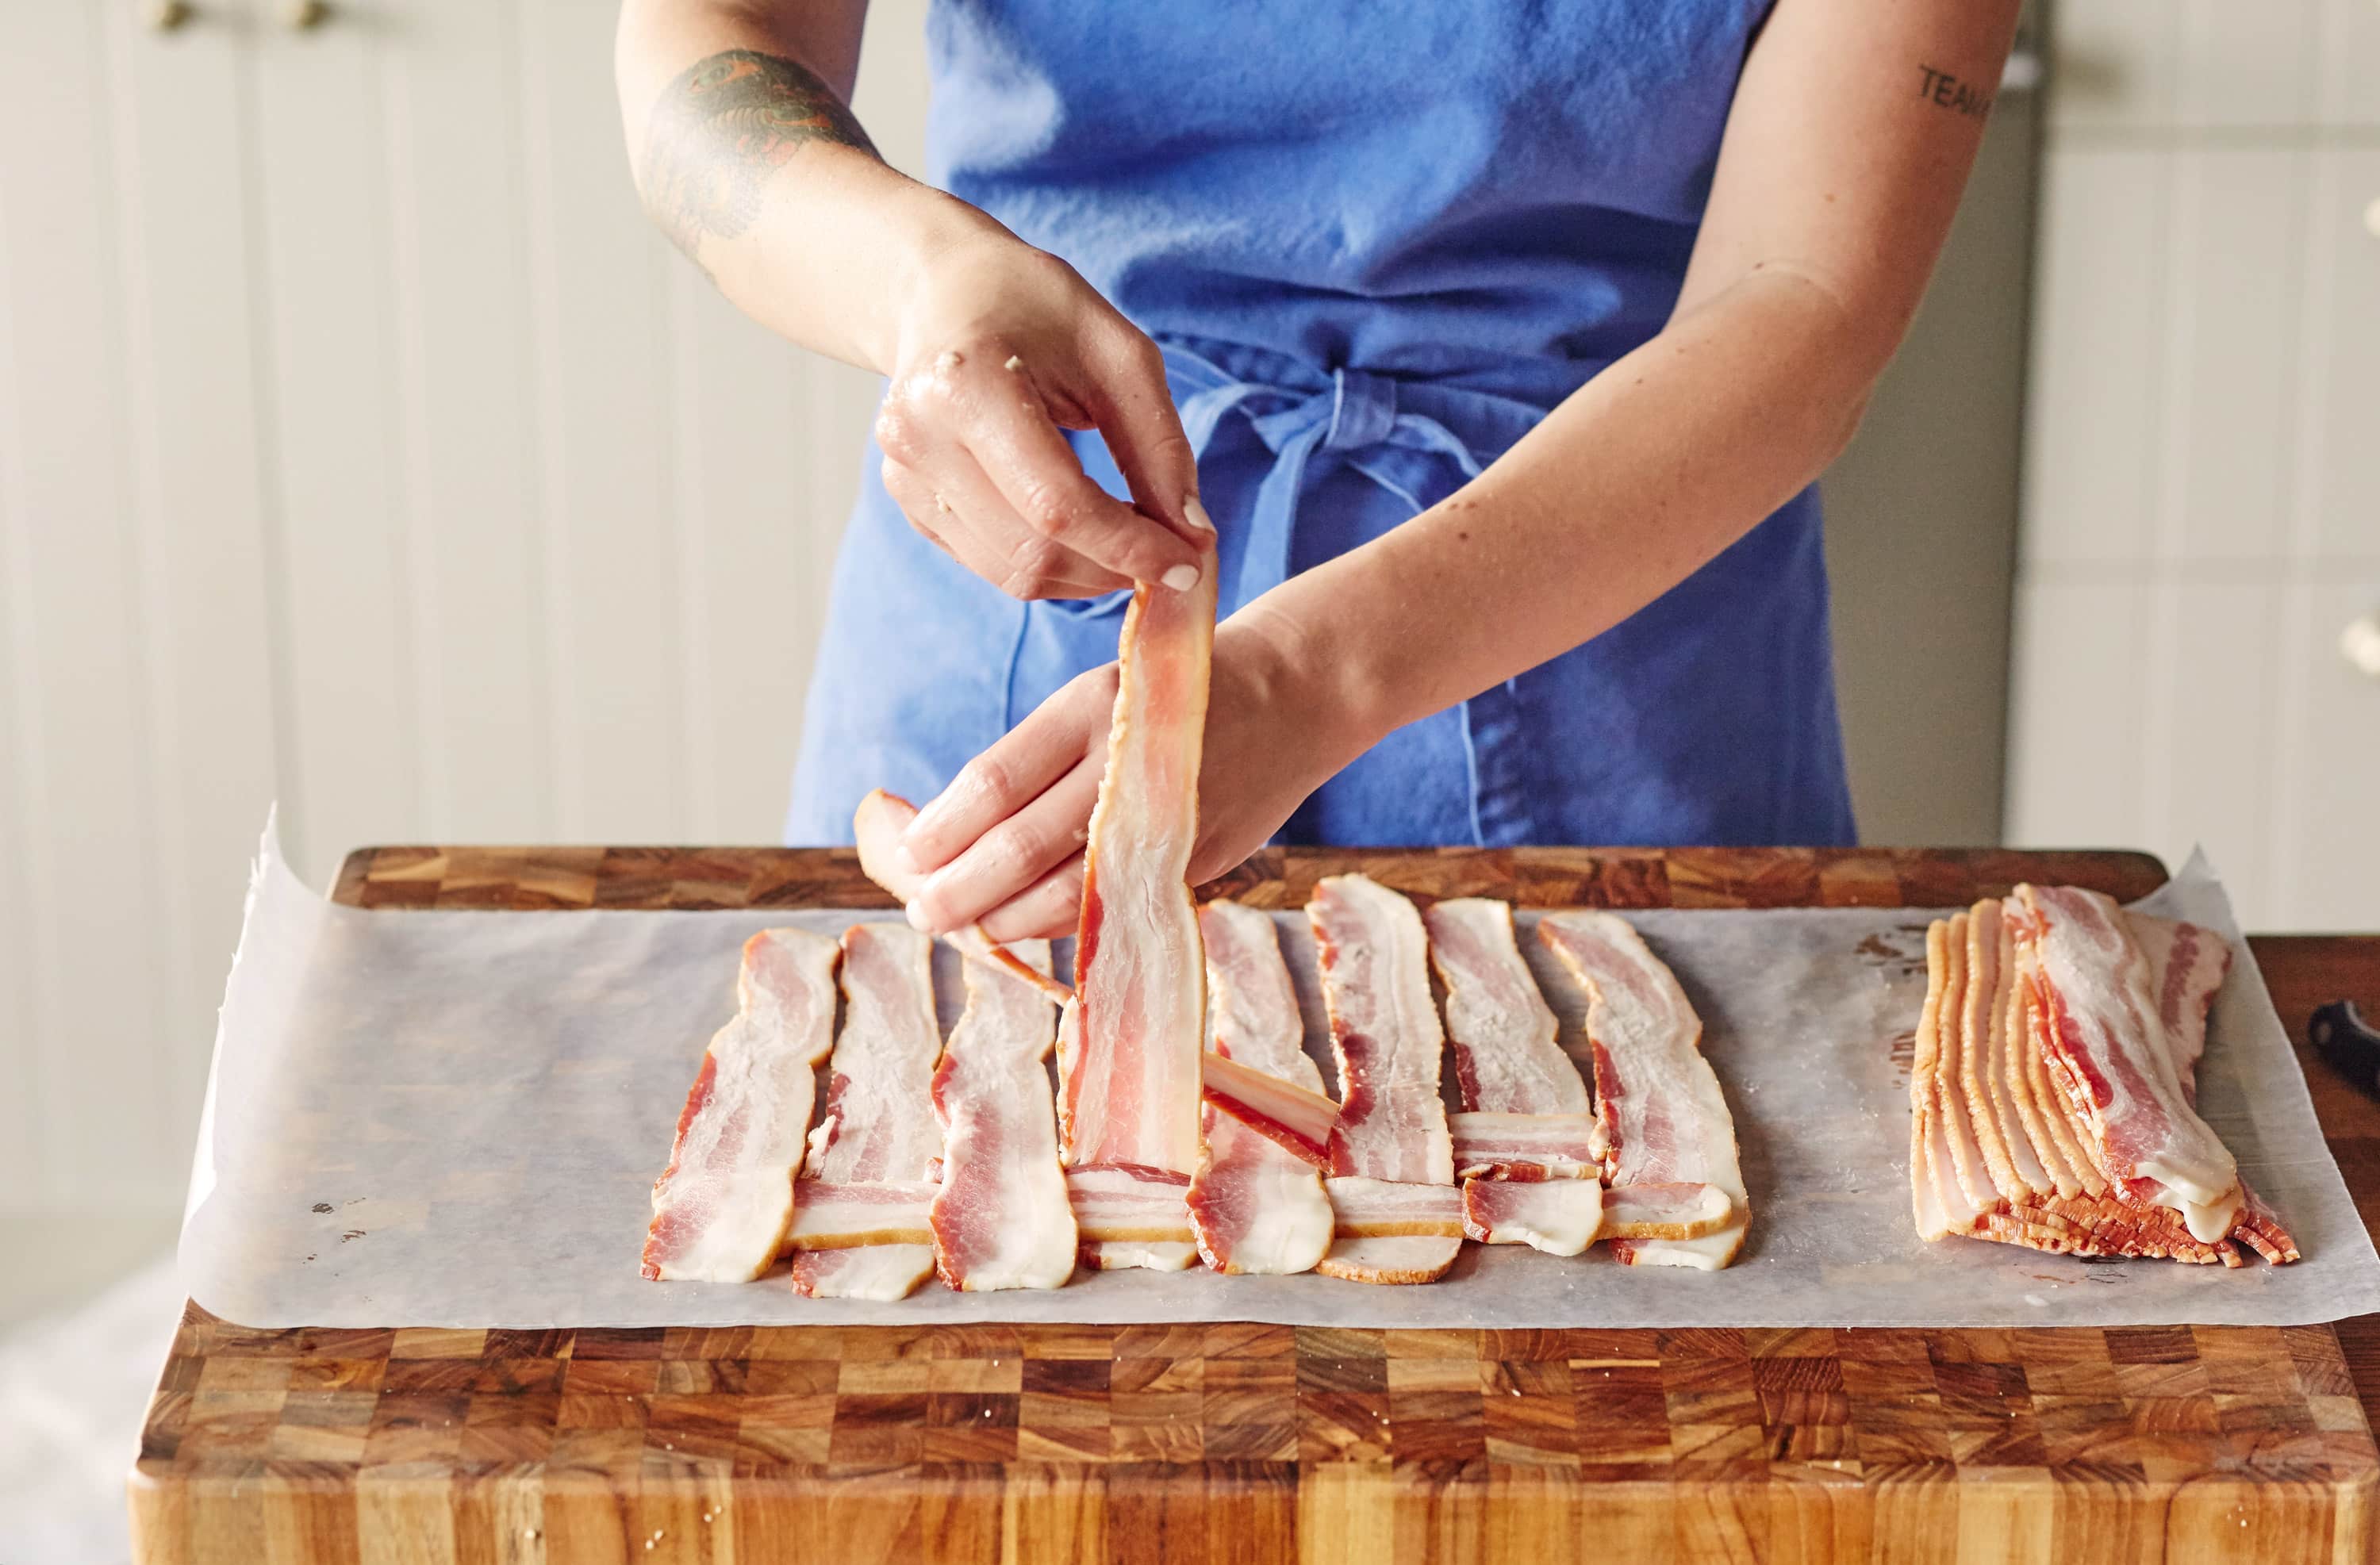 How To Make a Bacon-Wrapped Turkey | Kitchn